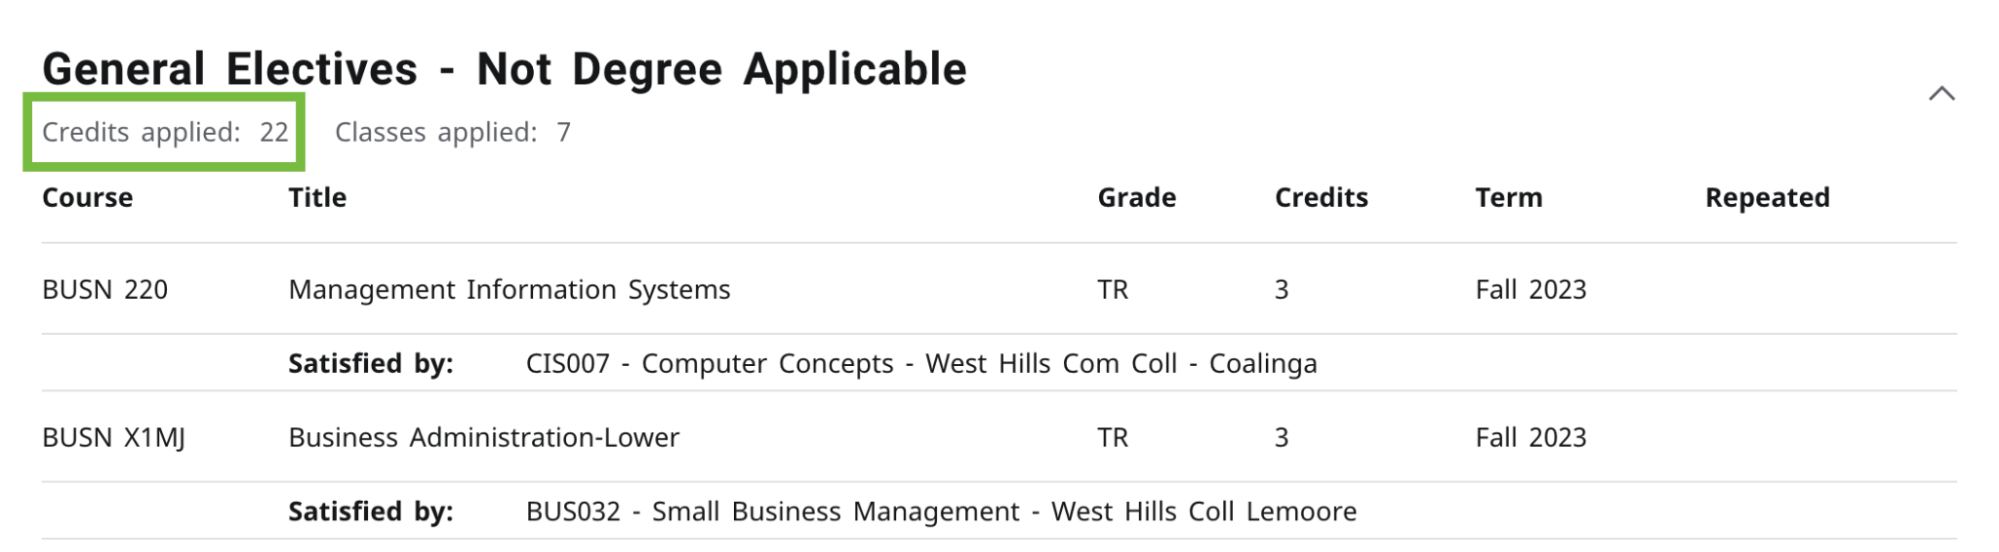 Screenshot of Degree Audit highlighting General Elective credits that are non-degree applicable